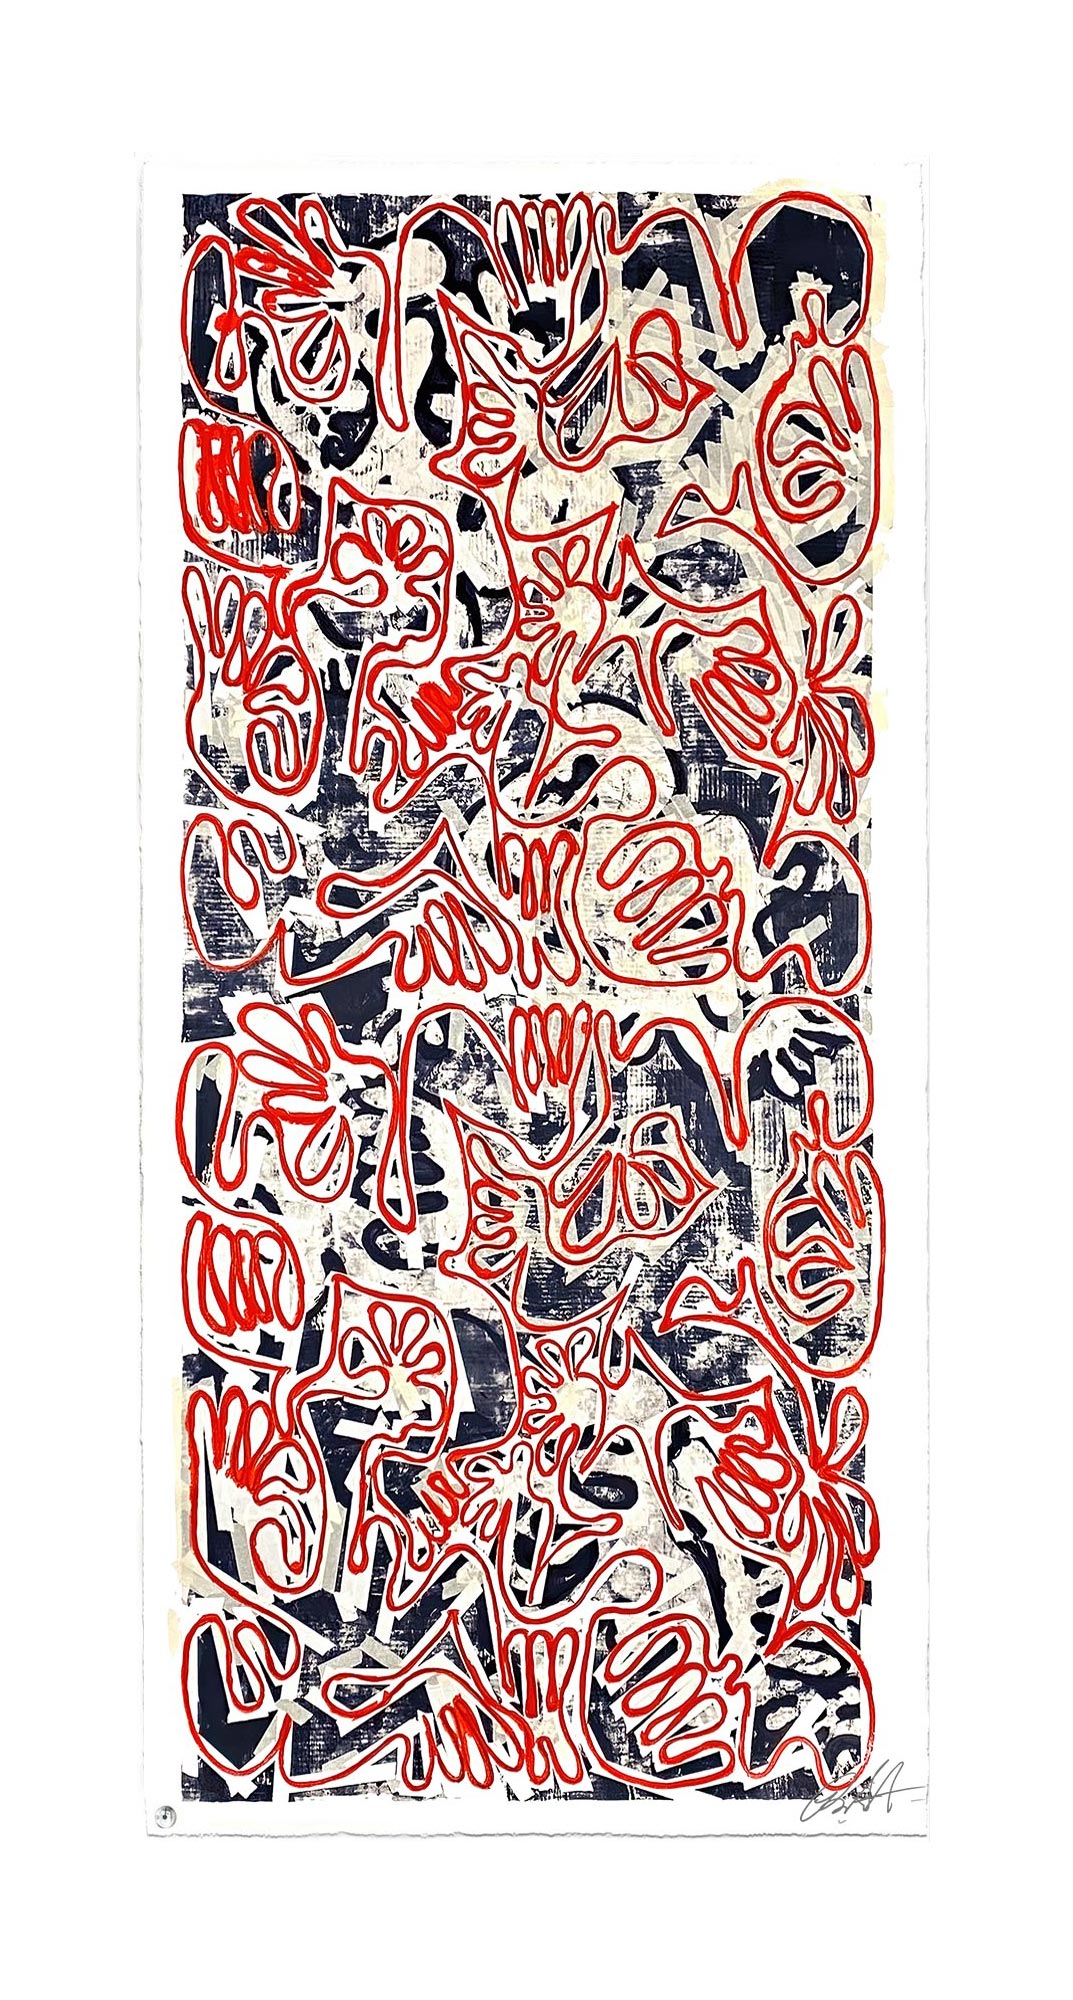 "Covid Chaos Red White & Blue (40 x 100in)" by Robert Santore ©2022. Framed, Hand painted artist silkscreen print, hand printed on the finest archival cold press cotton rag paper with hand torn edges. Painted in the Manhattan studio.